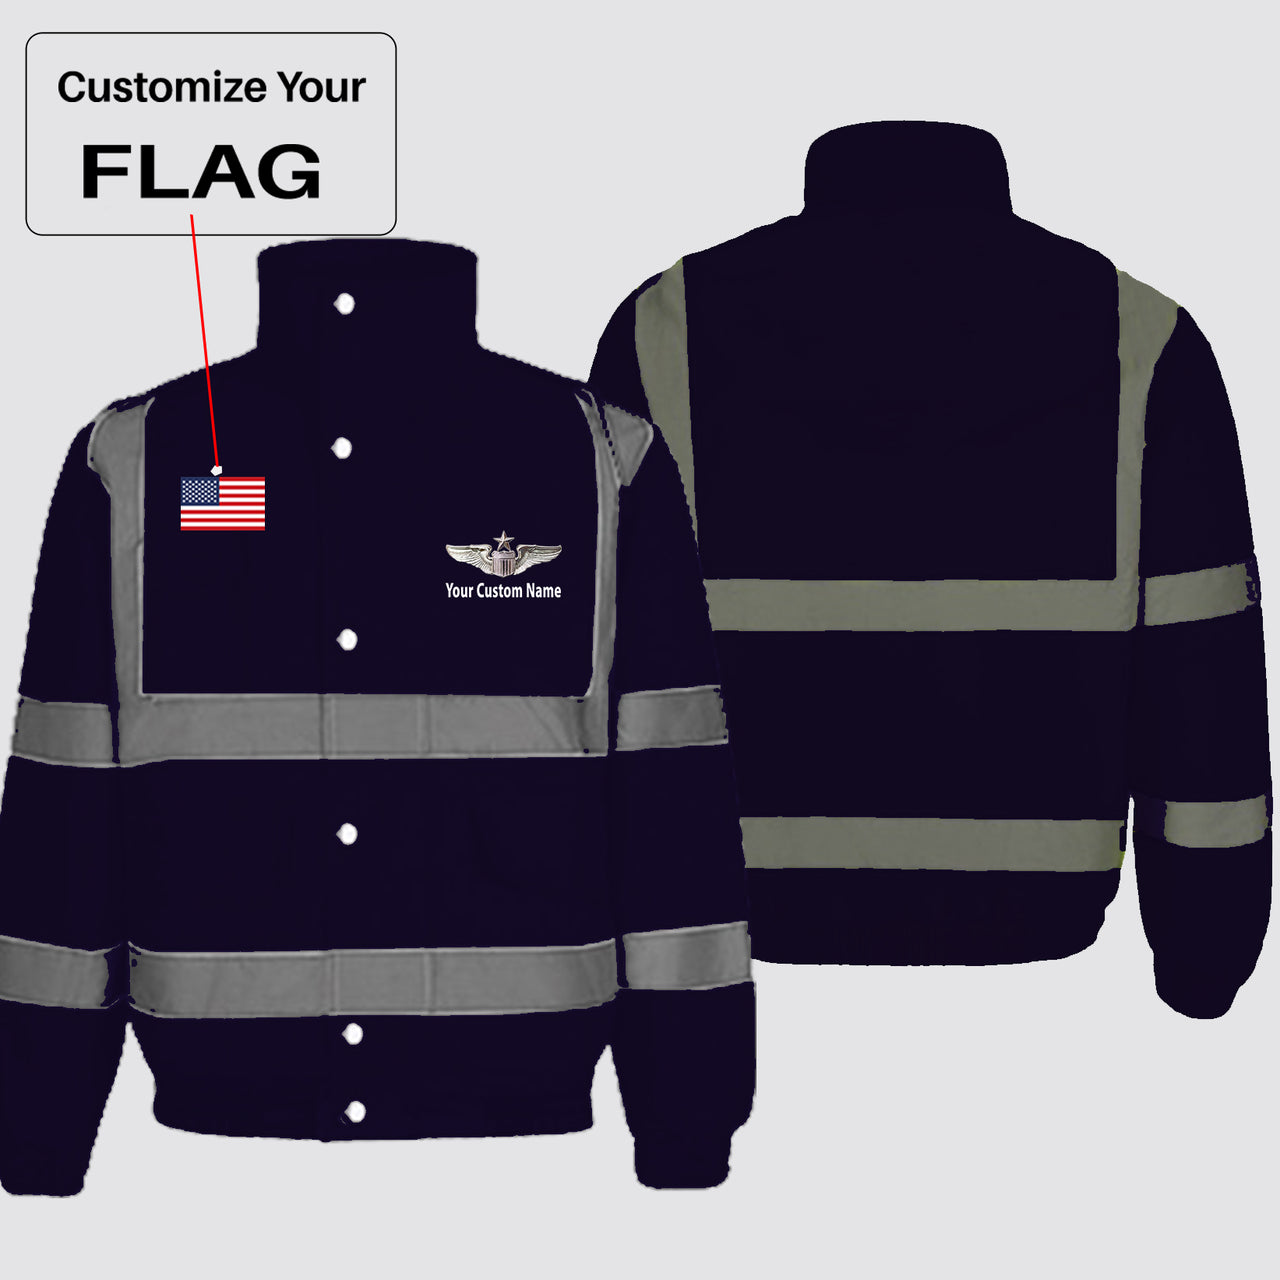 Custom Flag & Name with (US Air Force & Star) Designed Reflective Winter Jackets